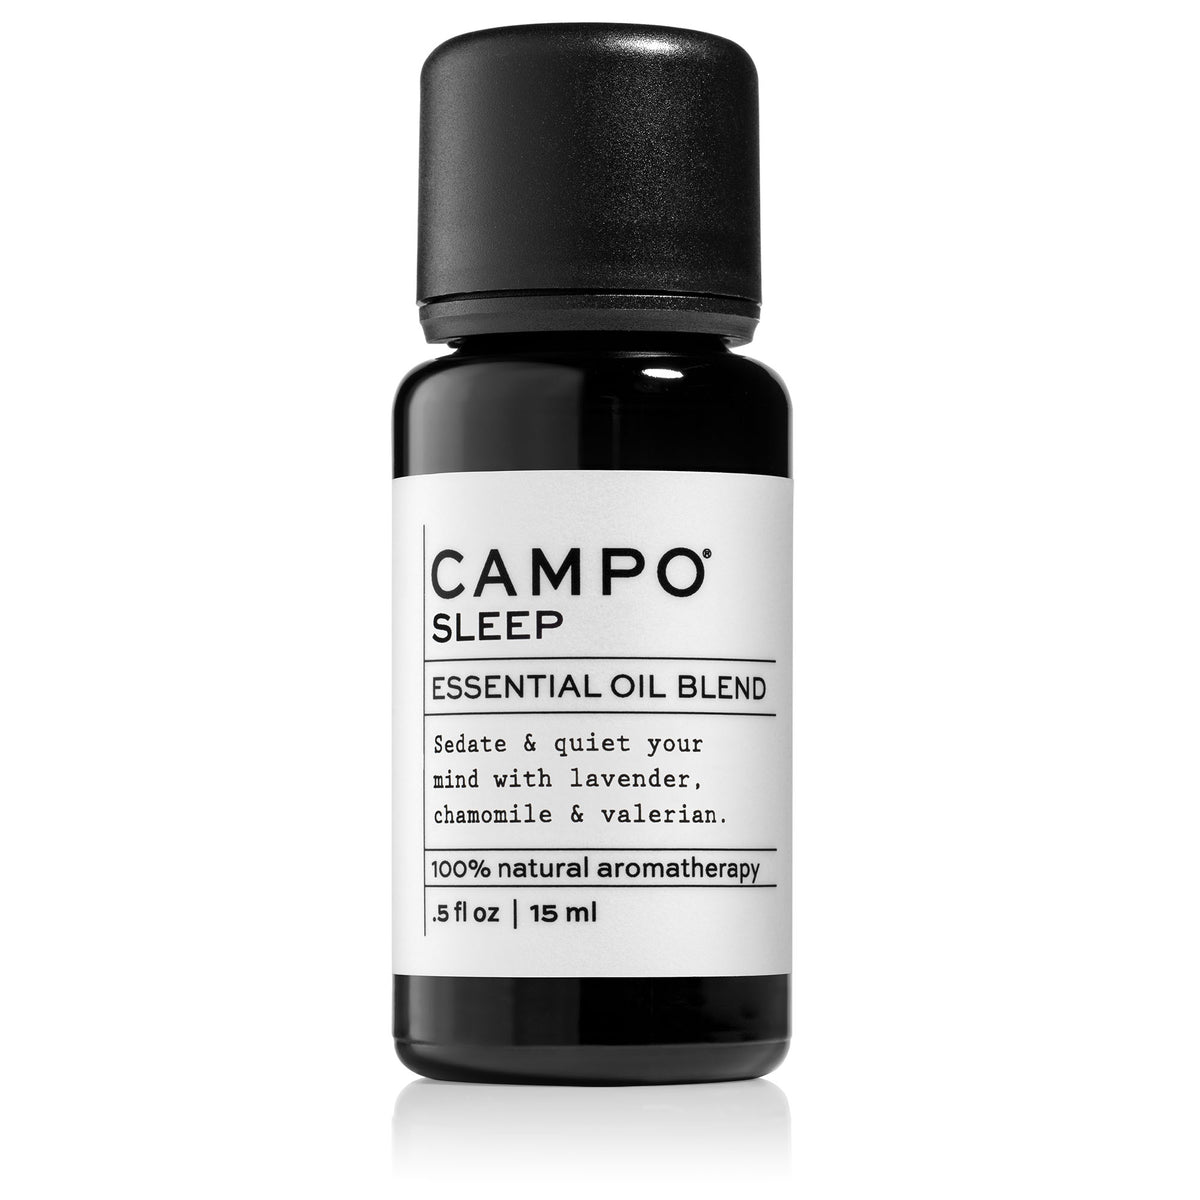 Campo Beauty SLEEP Blend 15 ml Essential Oil. Calm &amp; quiet your mind naturally with this 100% pure essential oil blend of French Lavender, Wild Palmarosa, Roman Chamomile, and Valerian Root.